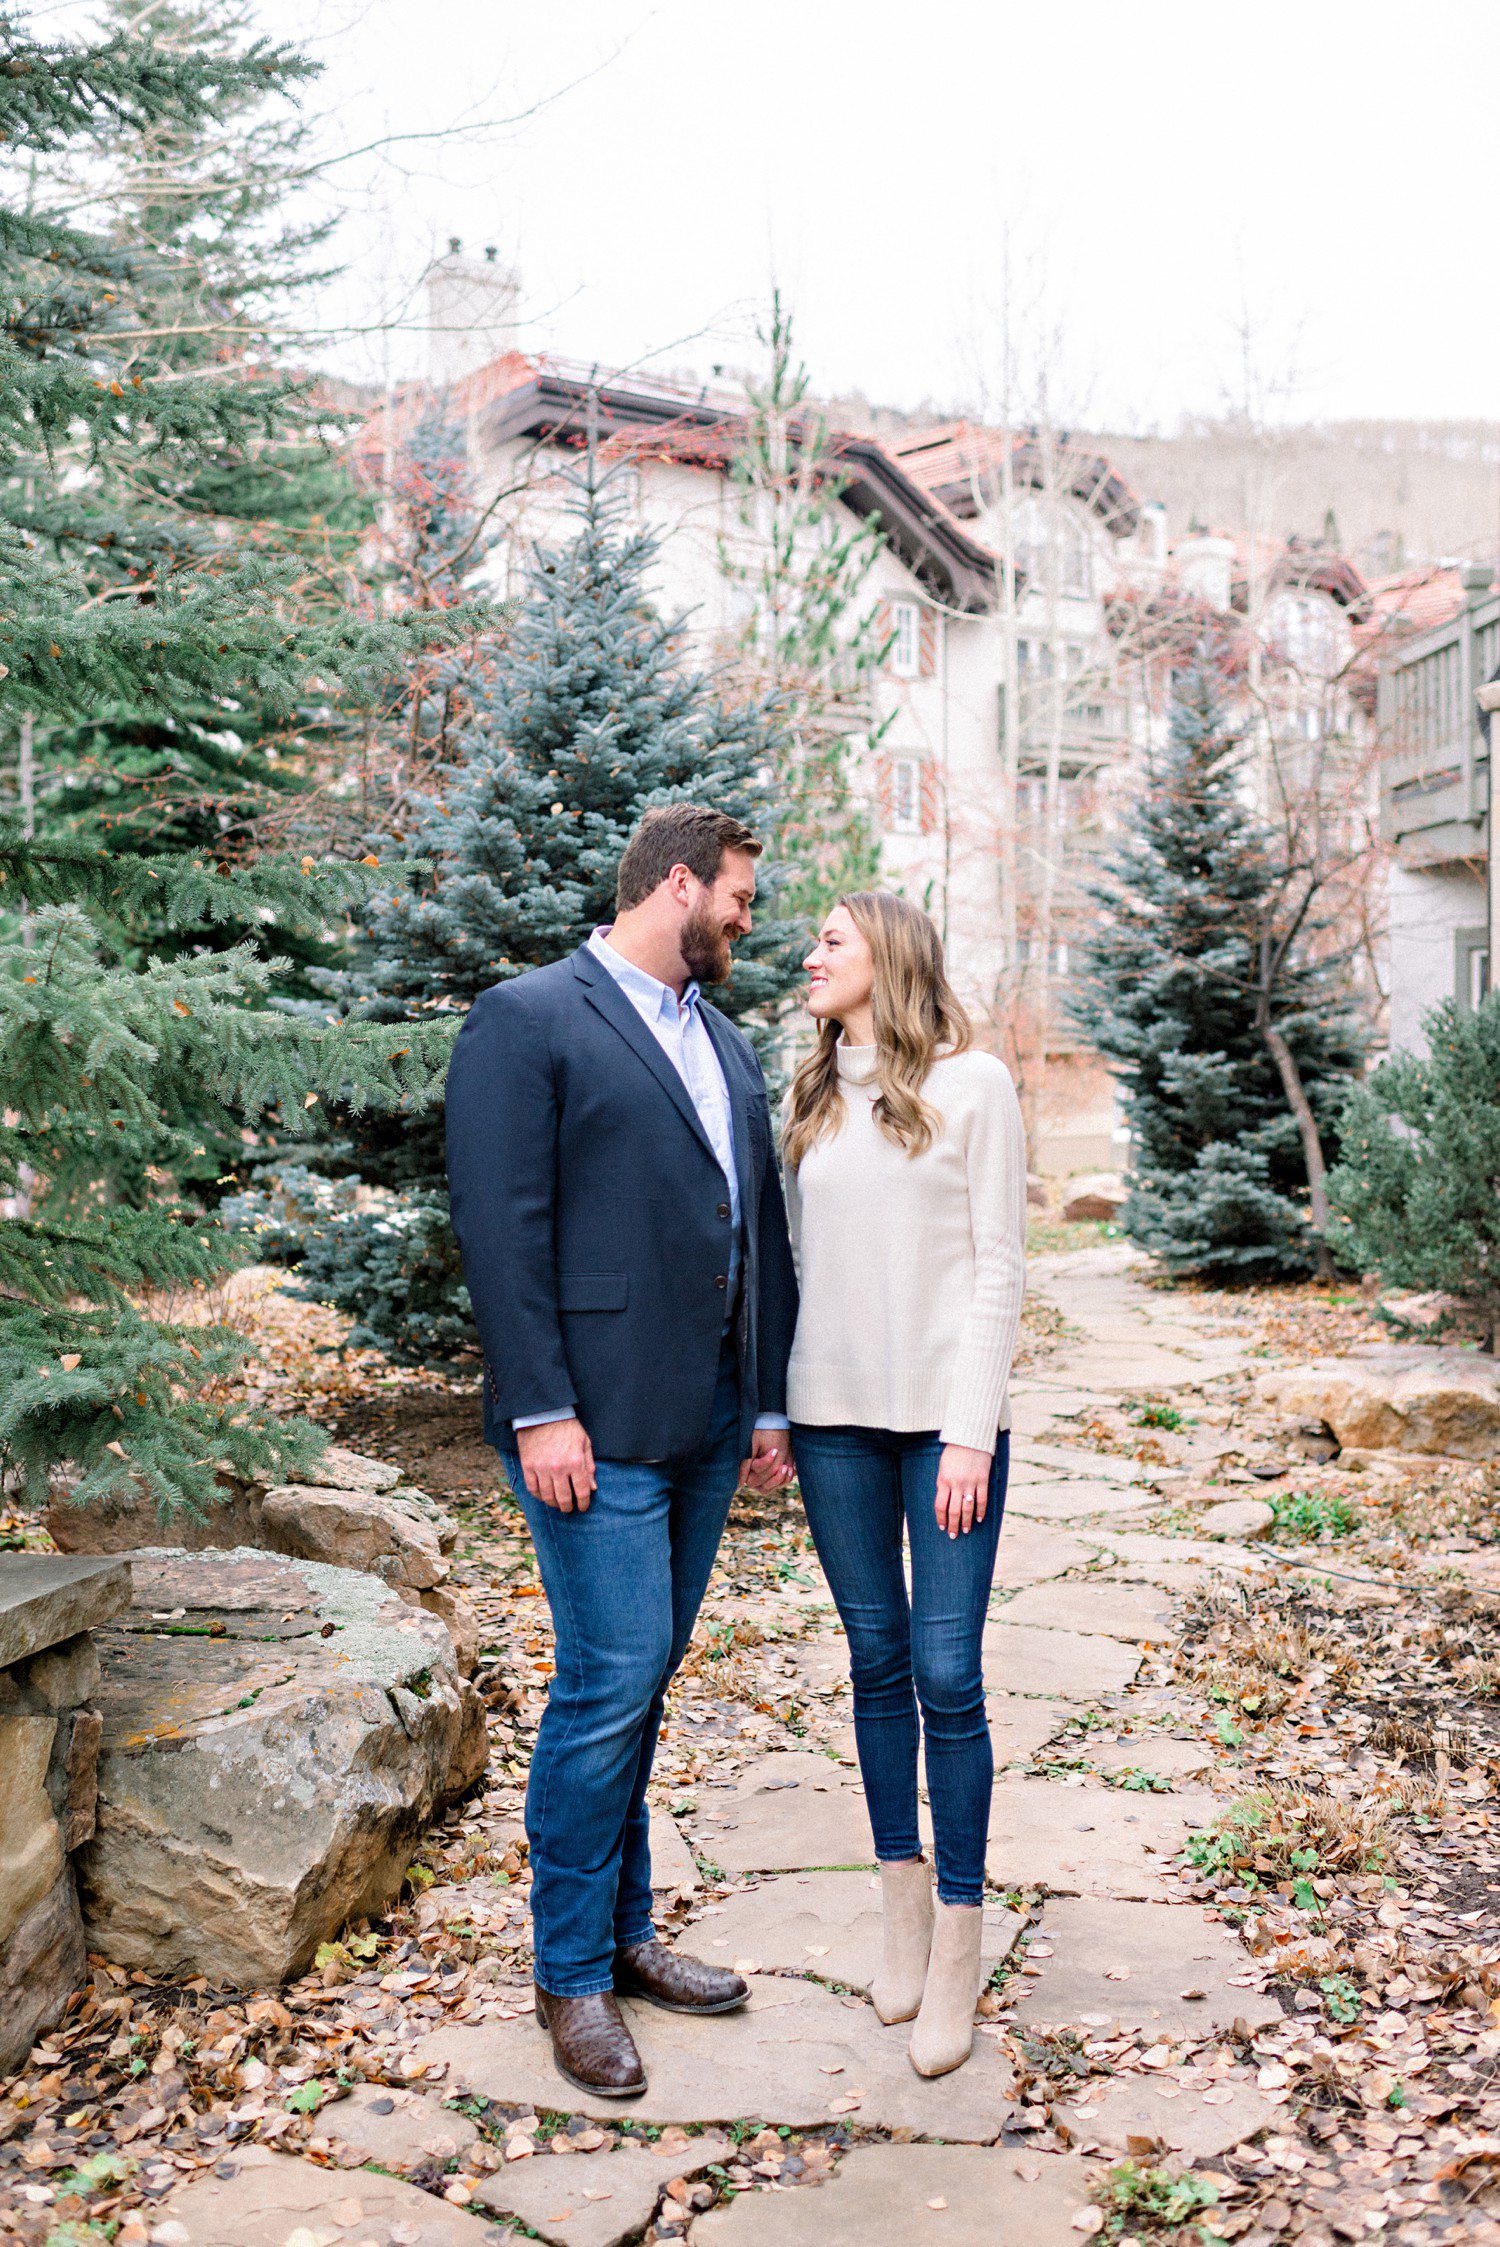 Winter Engagement Session in Vail Colorado in Vail Village